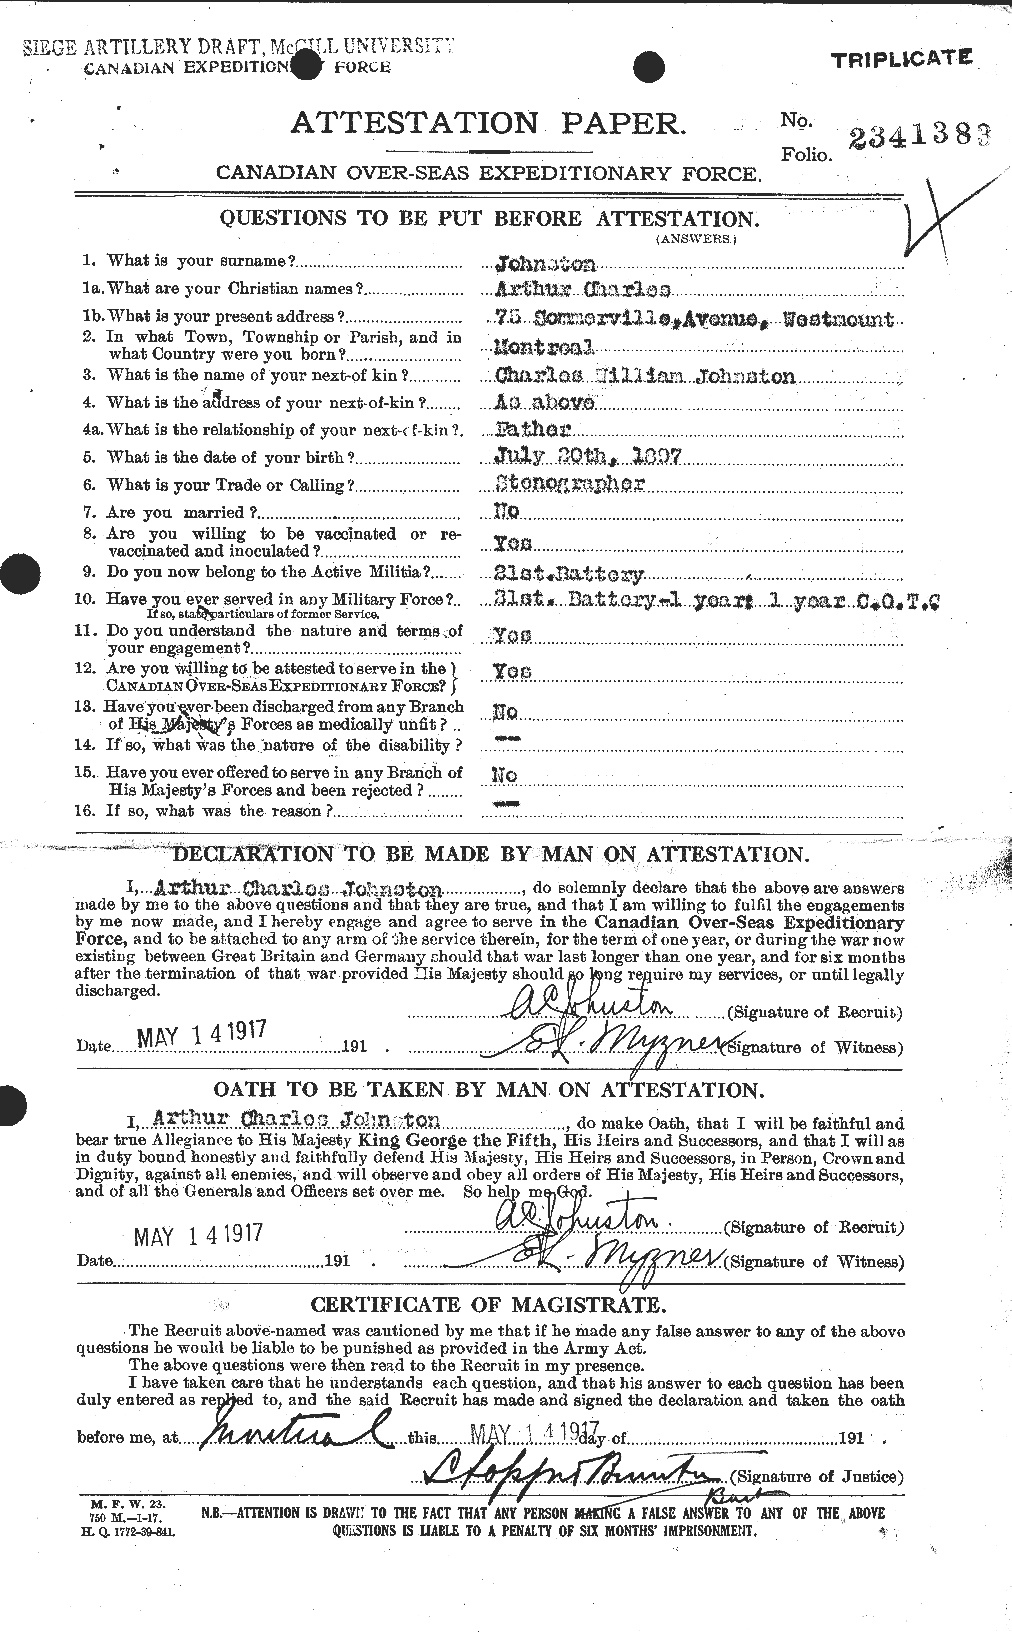 Personnel Records of the First World War - CEF 421039a